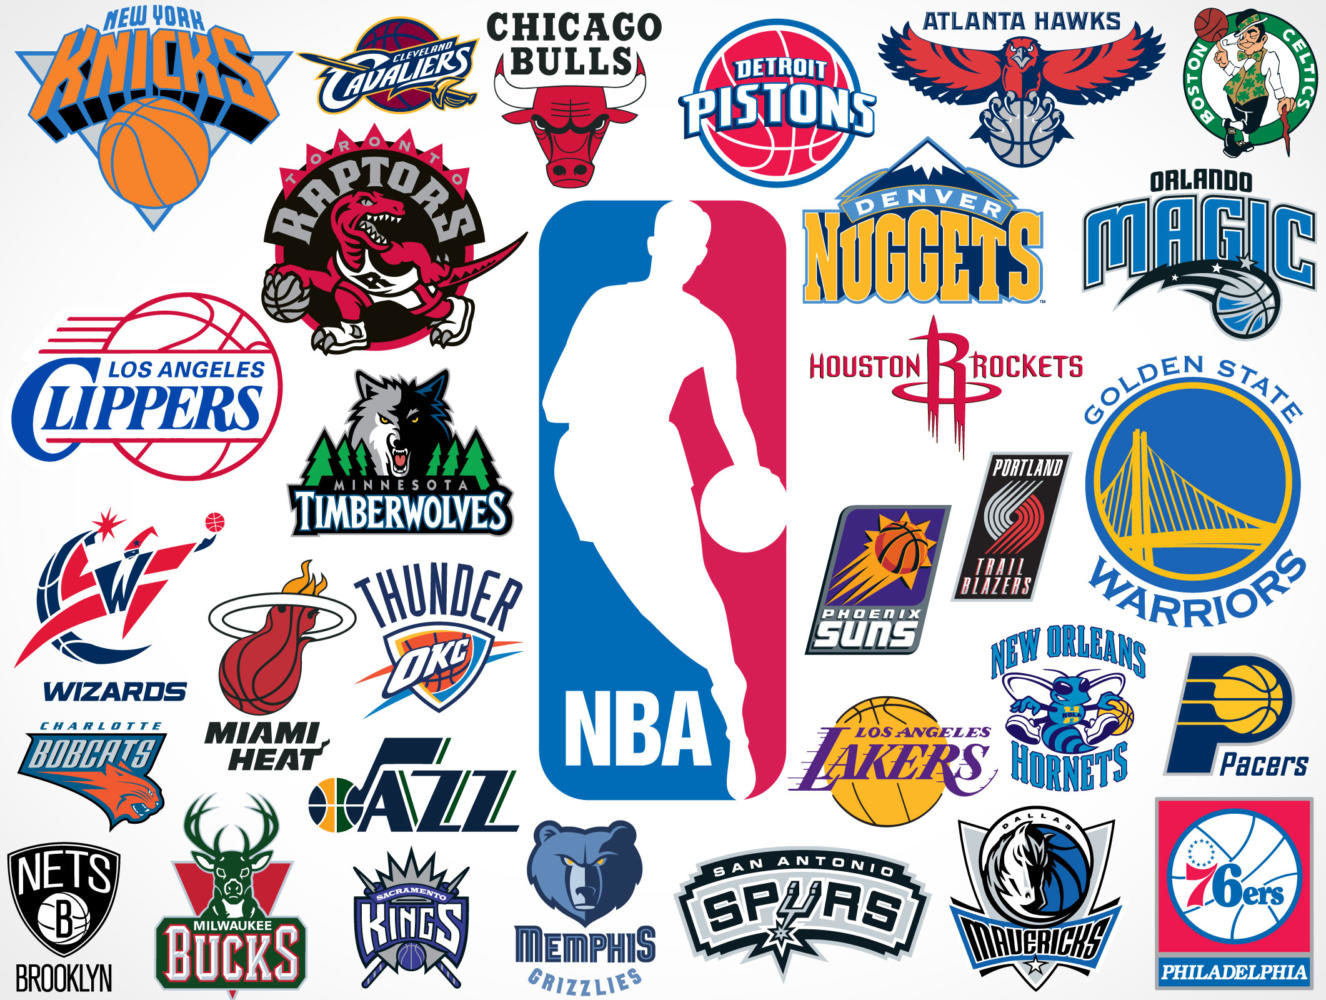 All+NBA+teams+have+an+opportunity+to+snatch+free+agents+this+summer.+